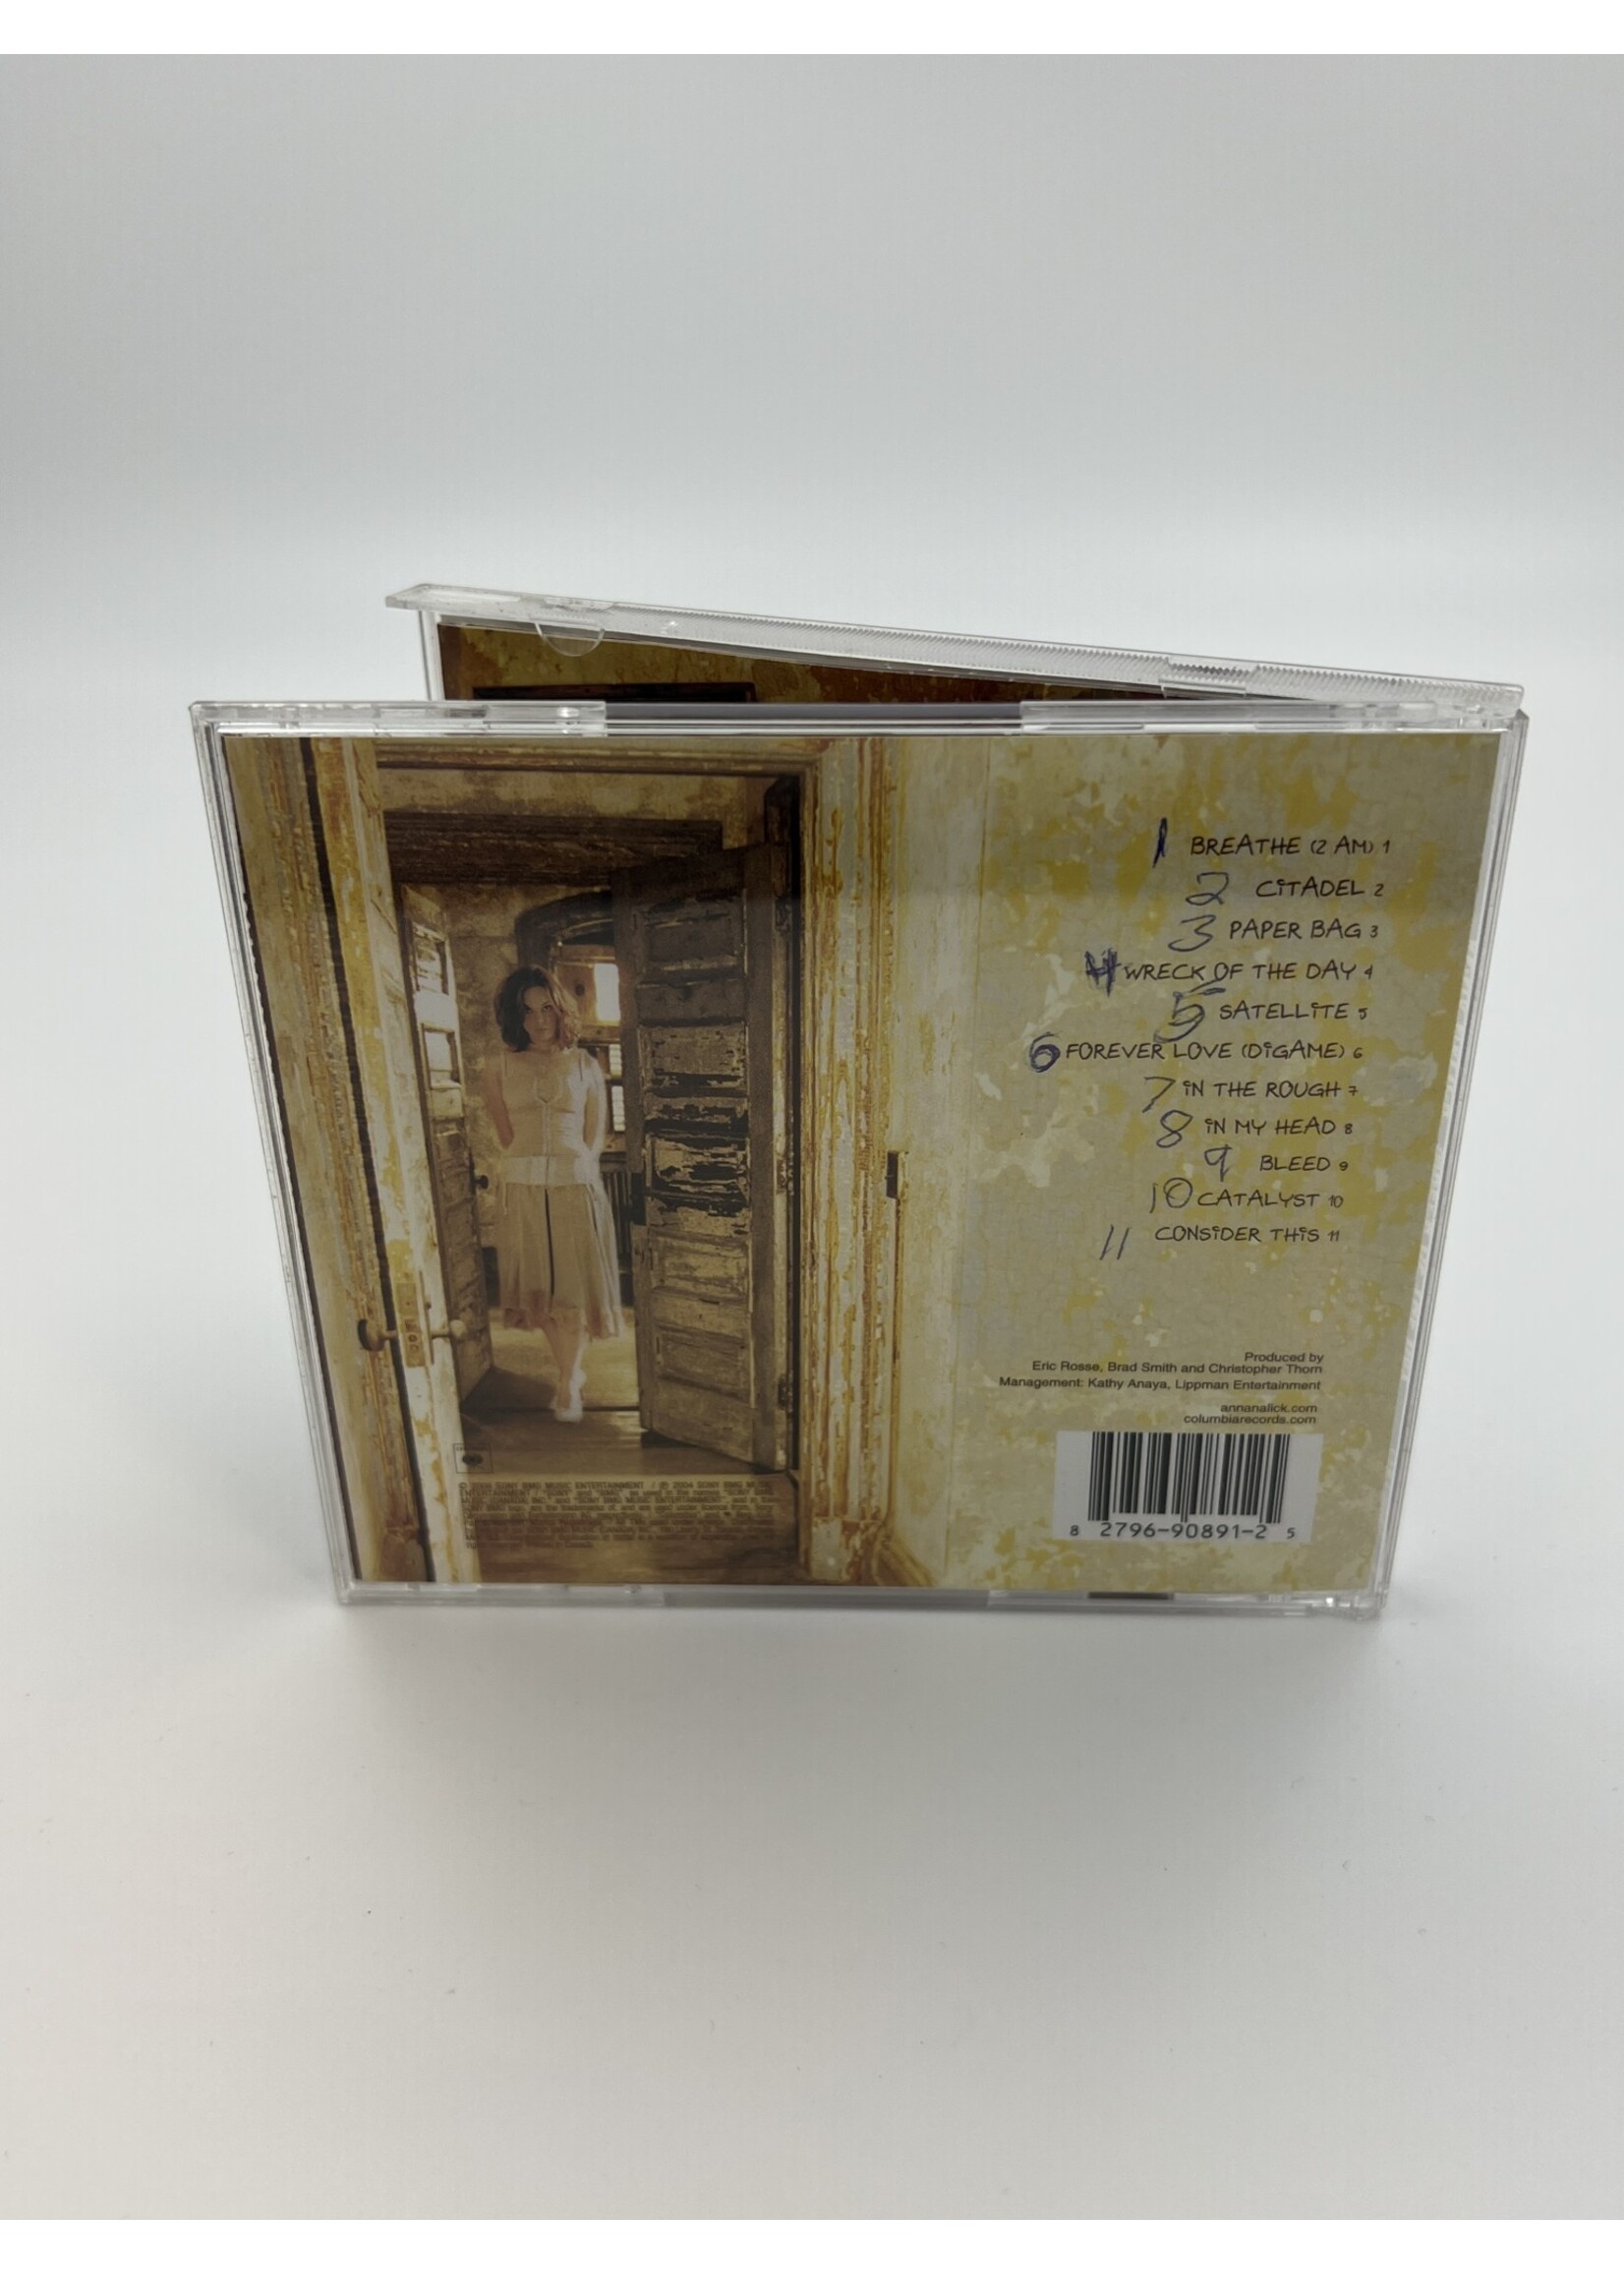 CD   Anna Nalick Wreck Of The Day CD